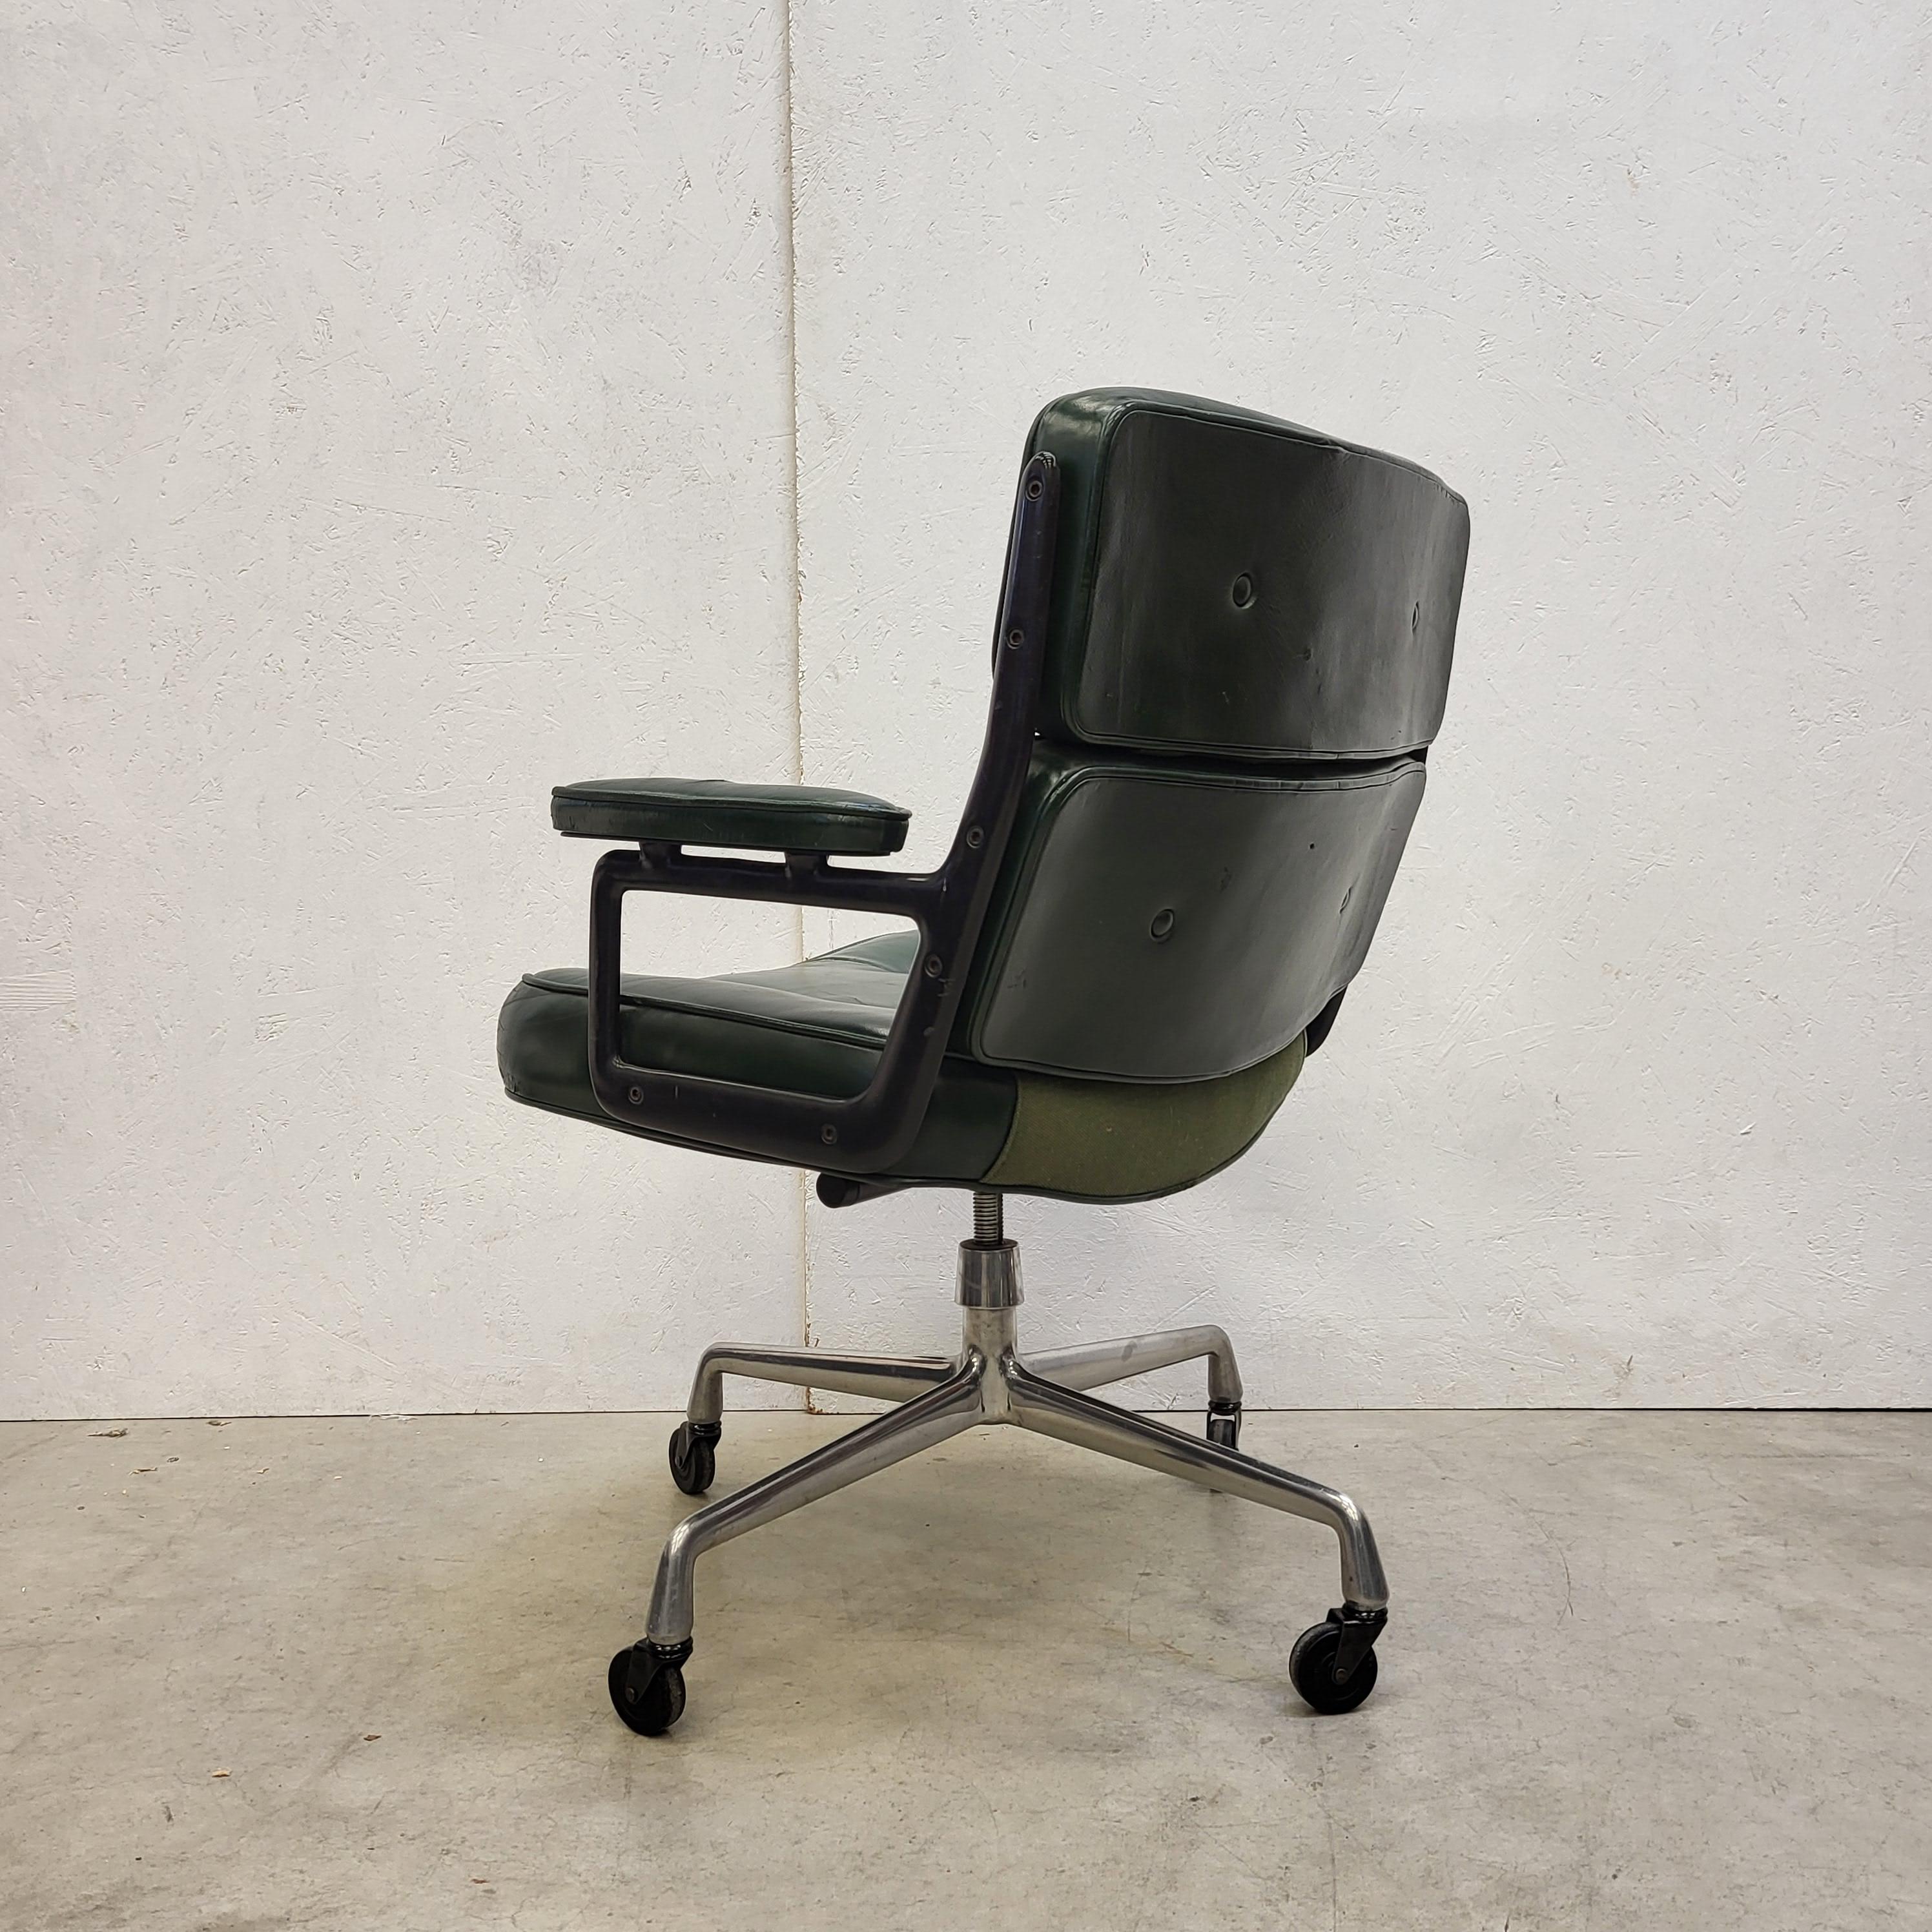 Late 20th Century Rare Green Herman Miller ES107 Lobby Office Chair by Charles Eames